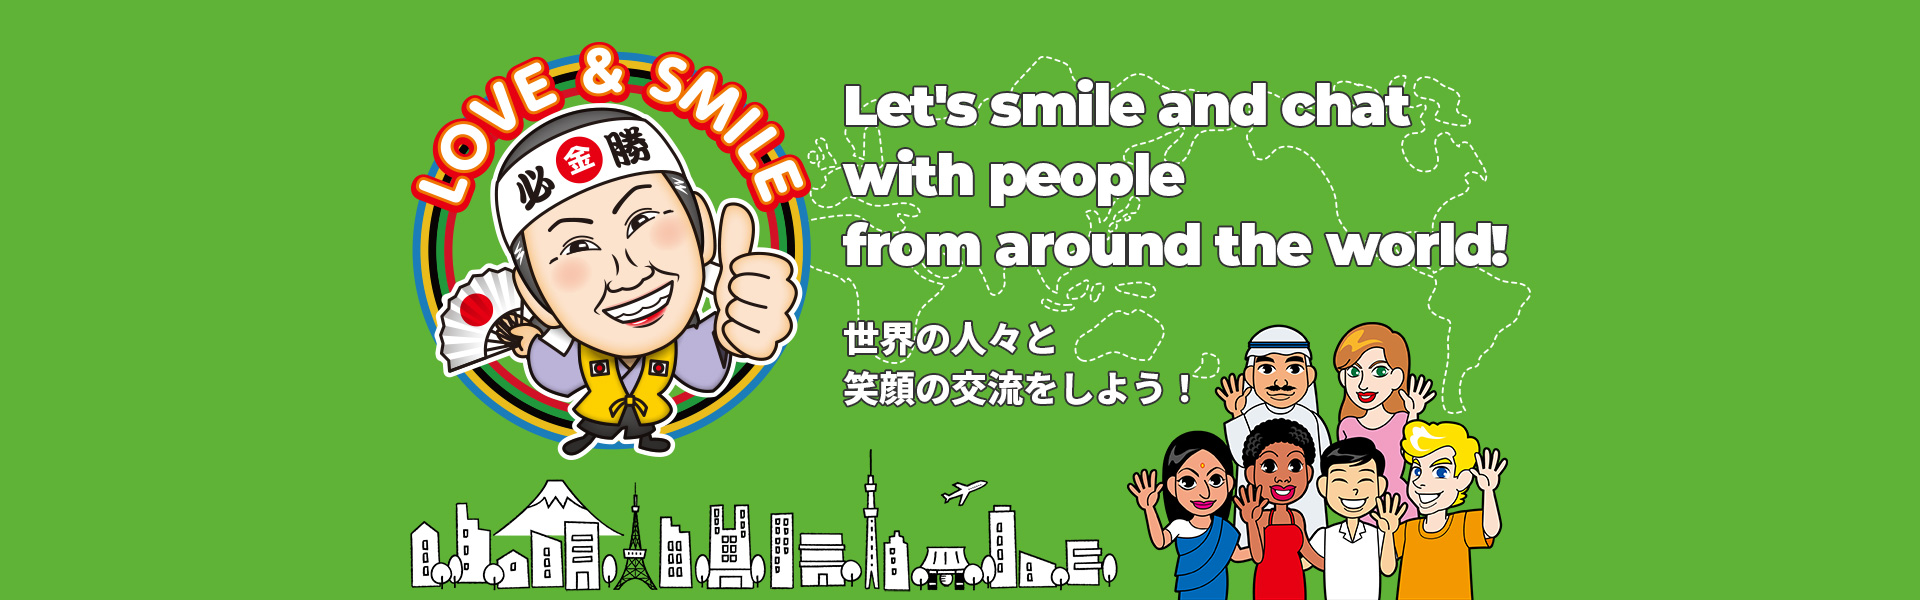 Let's smile and chat with people from around the world! 世界の人々と笑顔の交流をしよう！